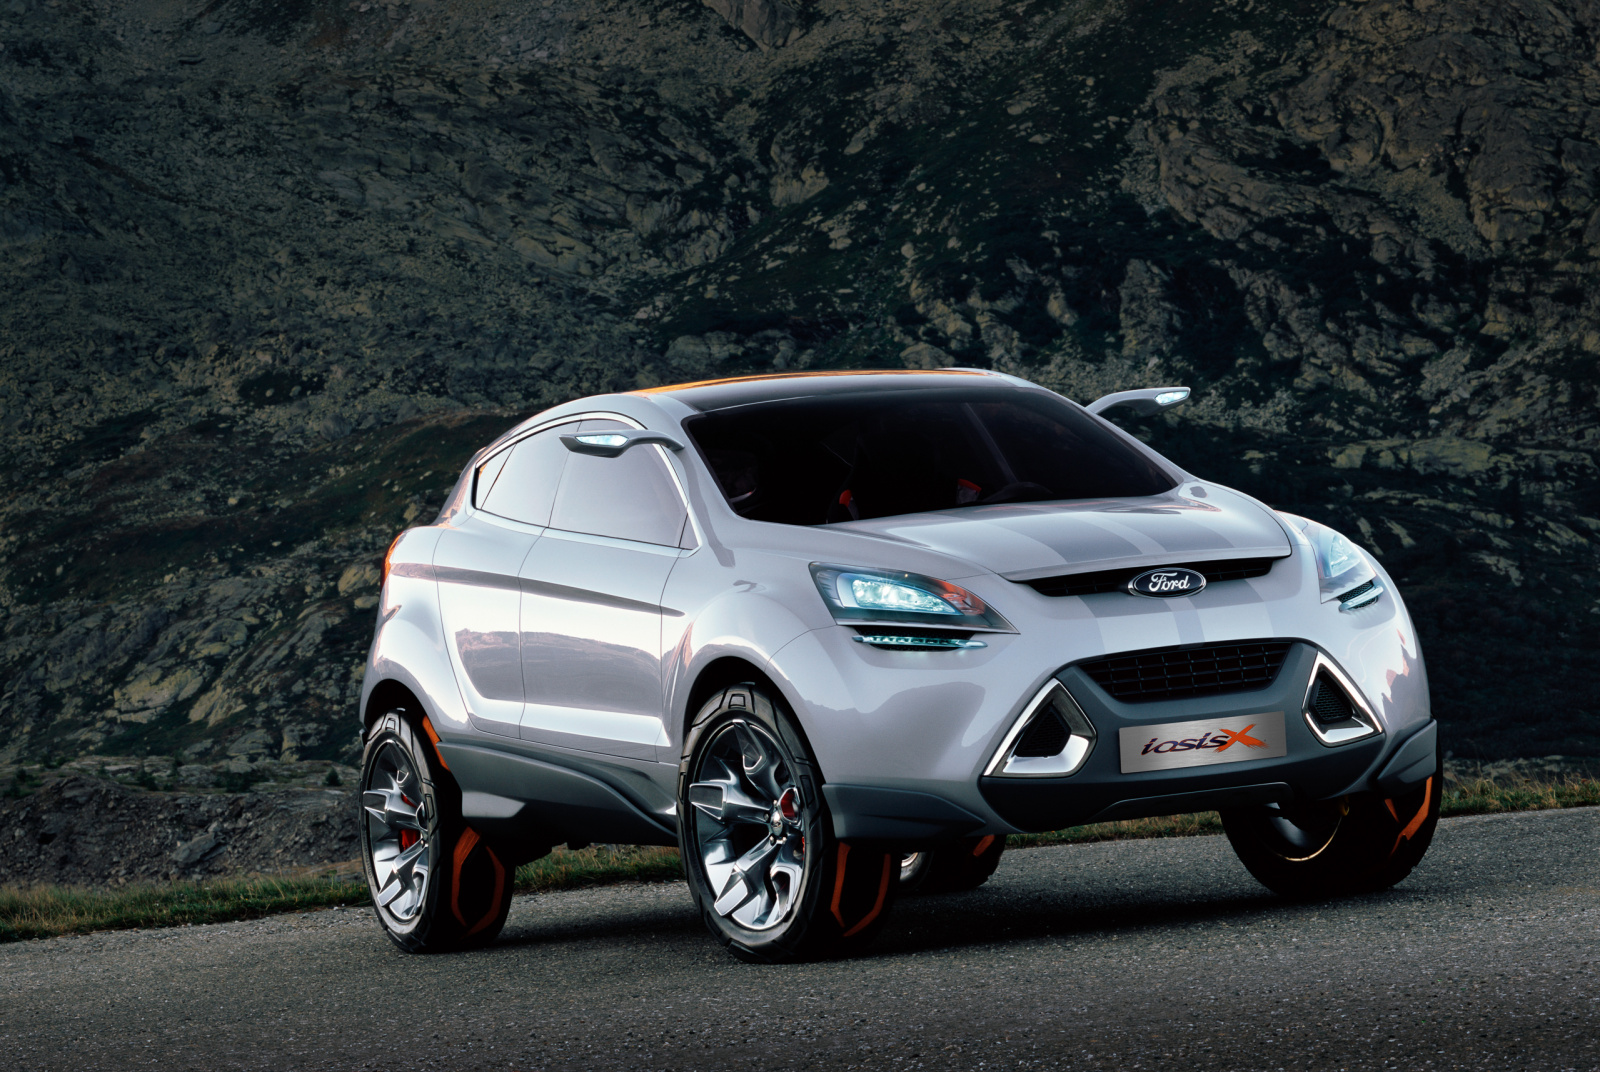 Ford Iosis X Concept - Foto eines Ford Concept-Cars